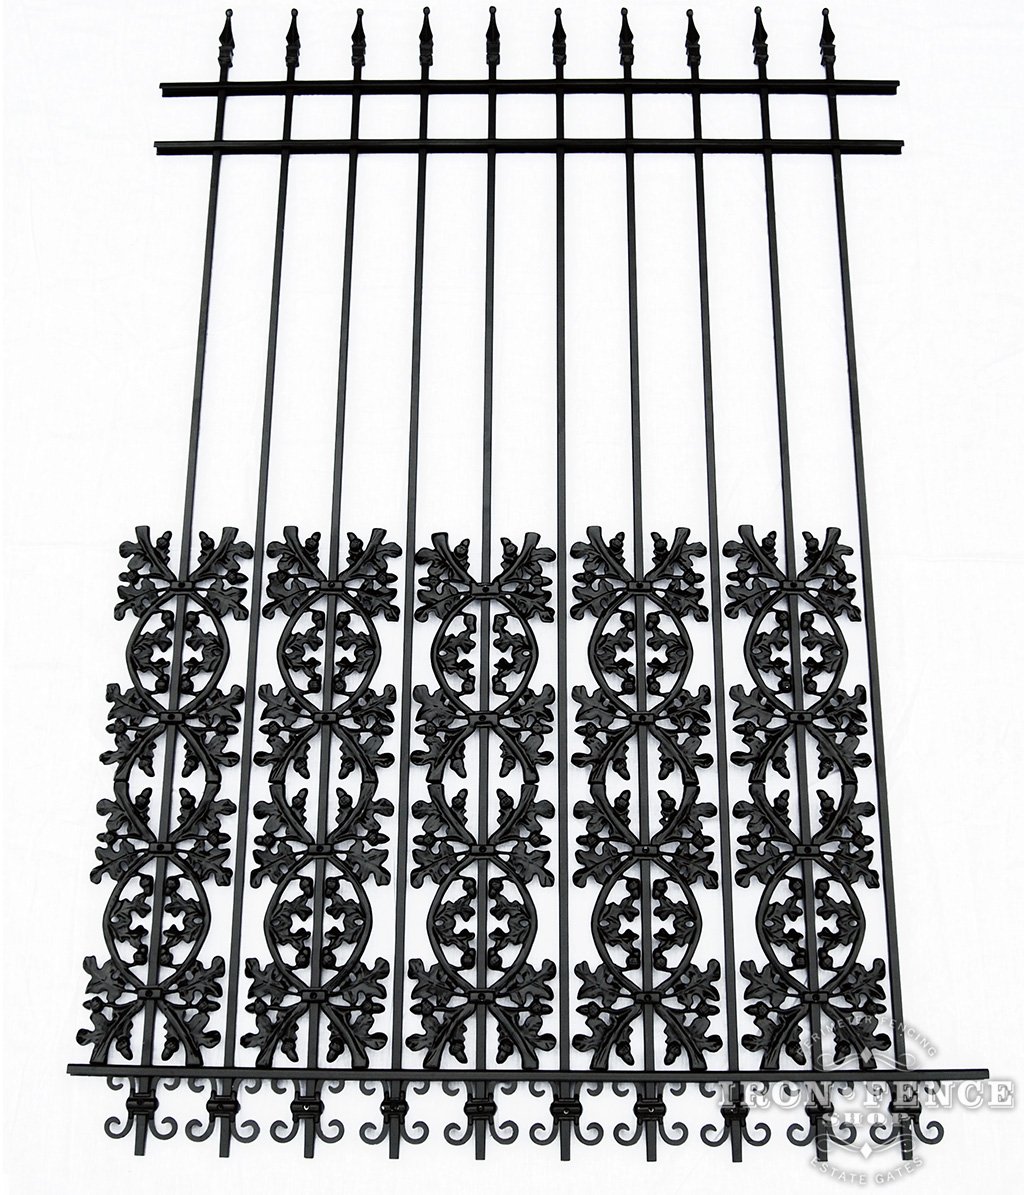 6ft Tall Classic Style Wrought Iron Fence in Traditional Grade with Stacked Oak And Butterfly Add-On Decorations Acting as a Puppy Picket Dog Barrier